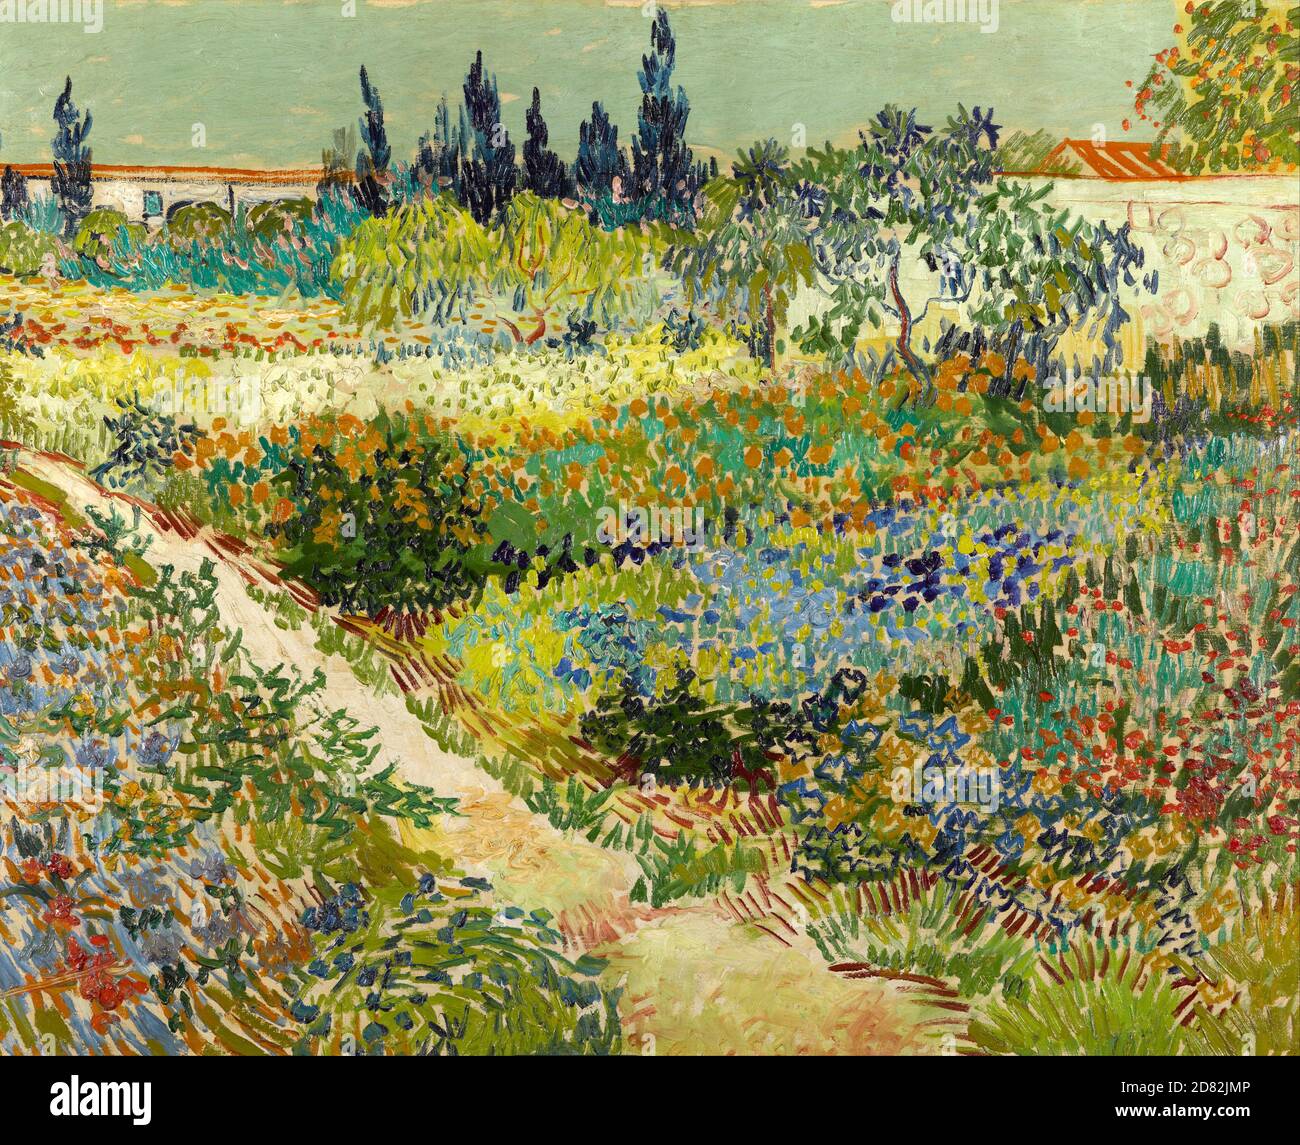 Title: The Garden at Arles Creator: Vincent van Gogh Date: 1888 Medium: Oil on canvas Dimensions: 72 x91 cm Location: Haags Gemeentemuseum, The Hague Stock Photo